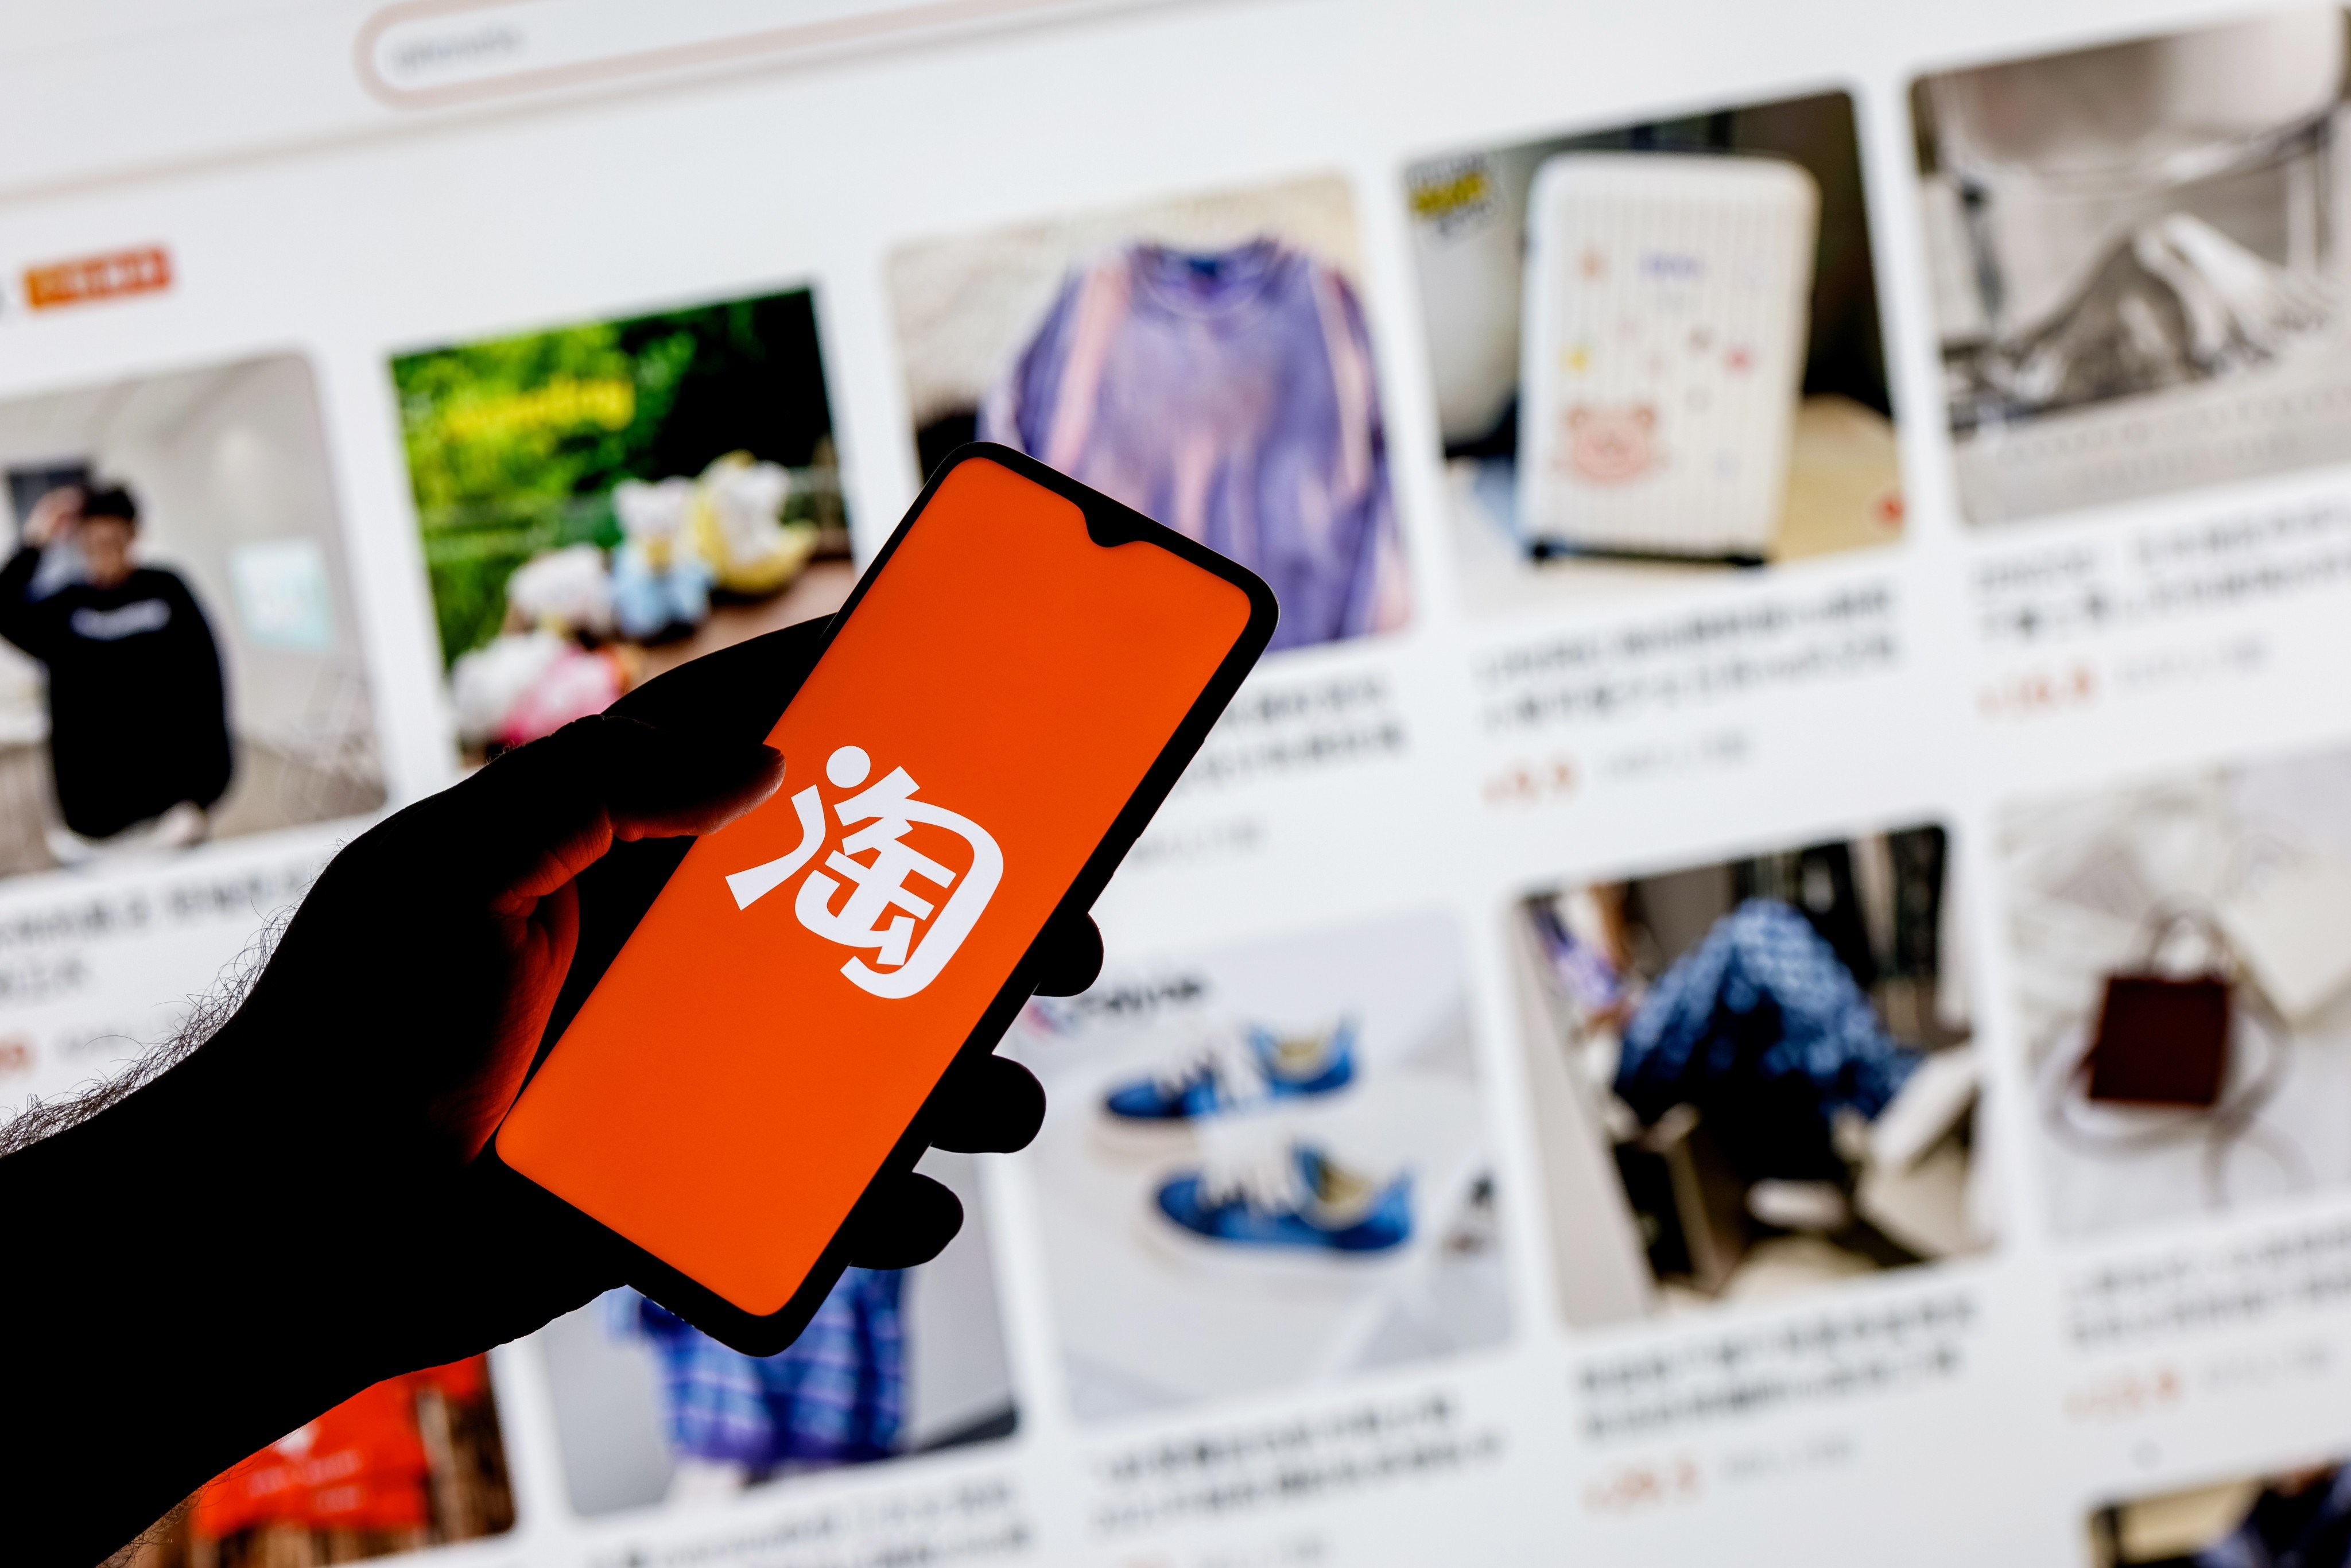 With Taobao now directly under Alibaba’s CEO, along with the company’s cloud unit, analysts see the conglomerate’s e-commerce operations becoming more tech-focused. Photo: Shutterstock